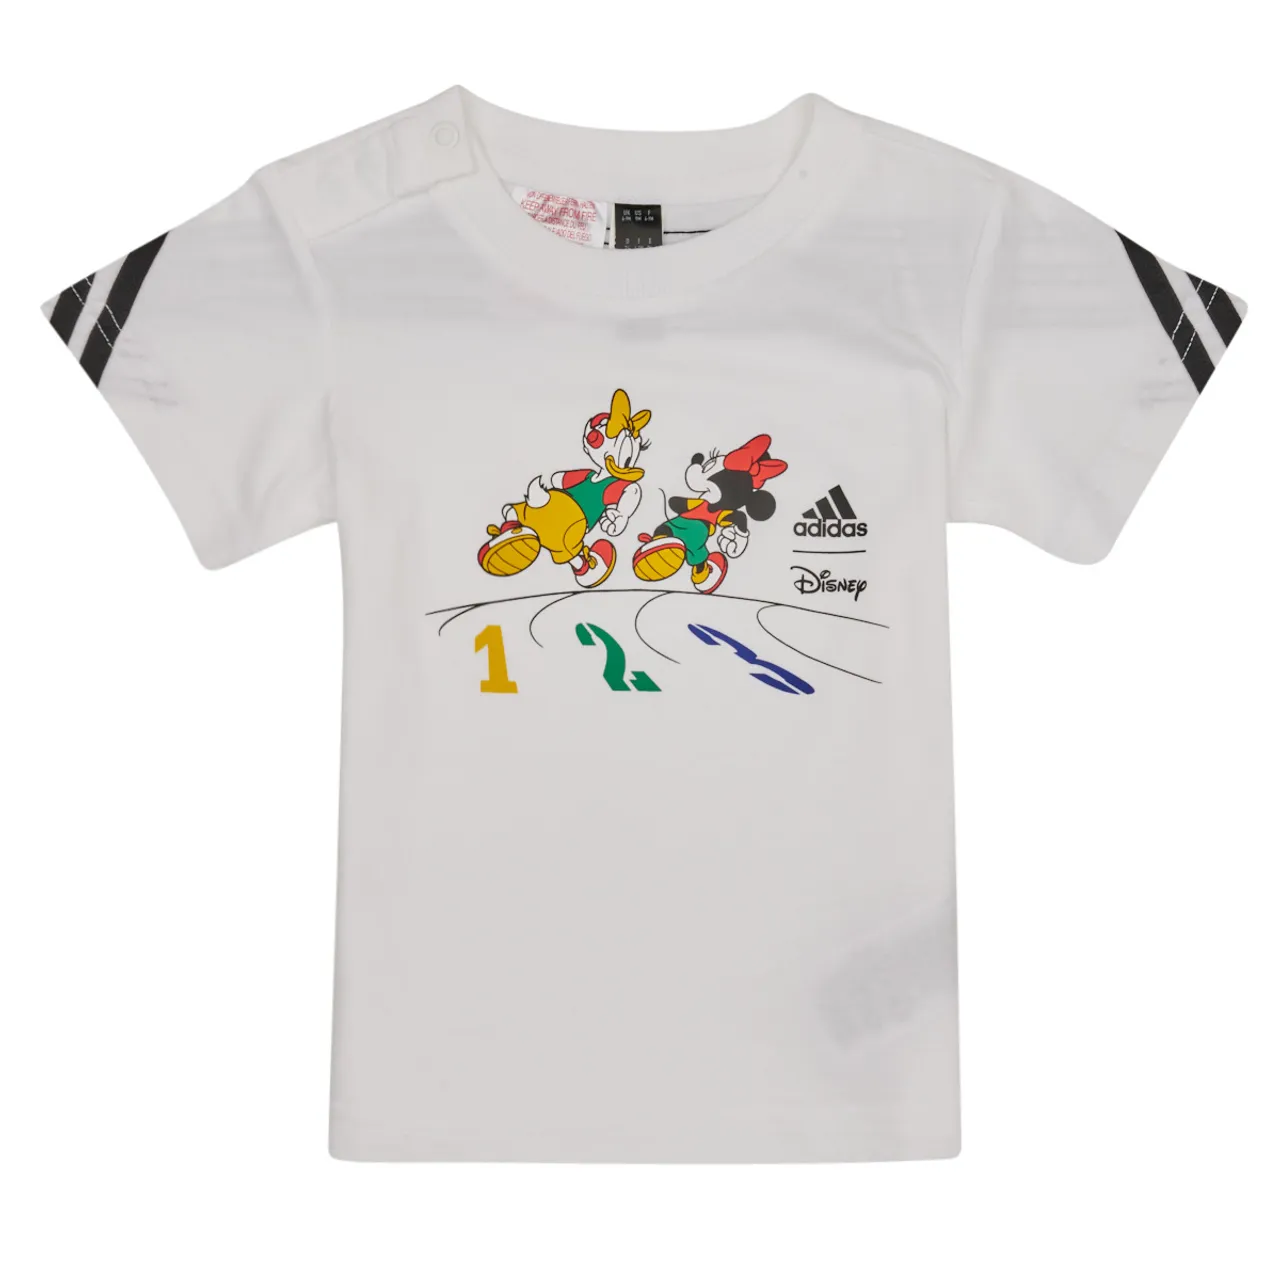 adidas  I DY MM T  boys's Children's T shirt in White